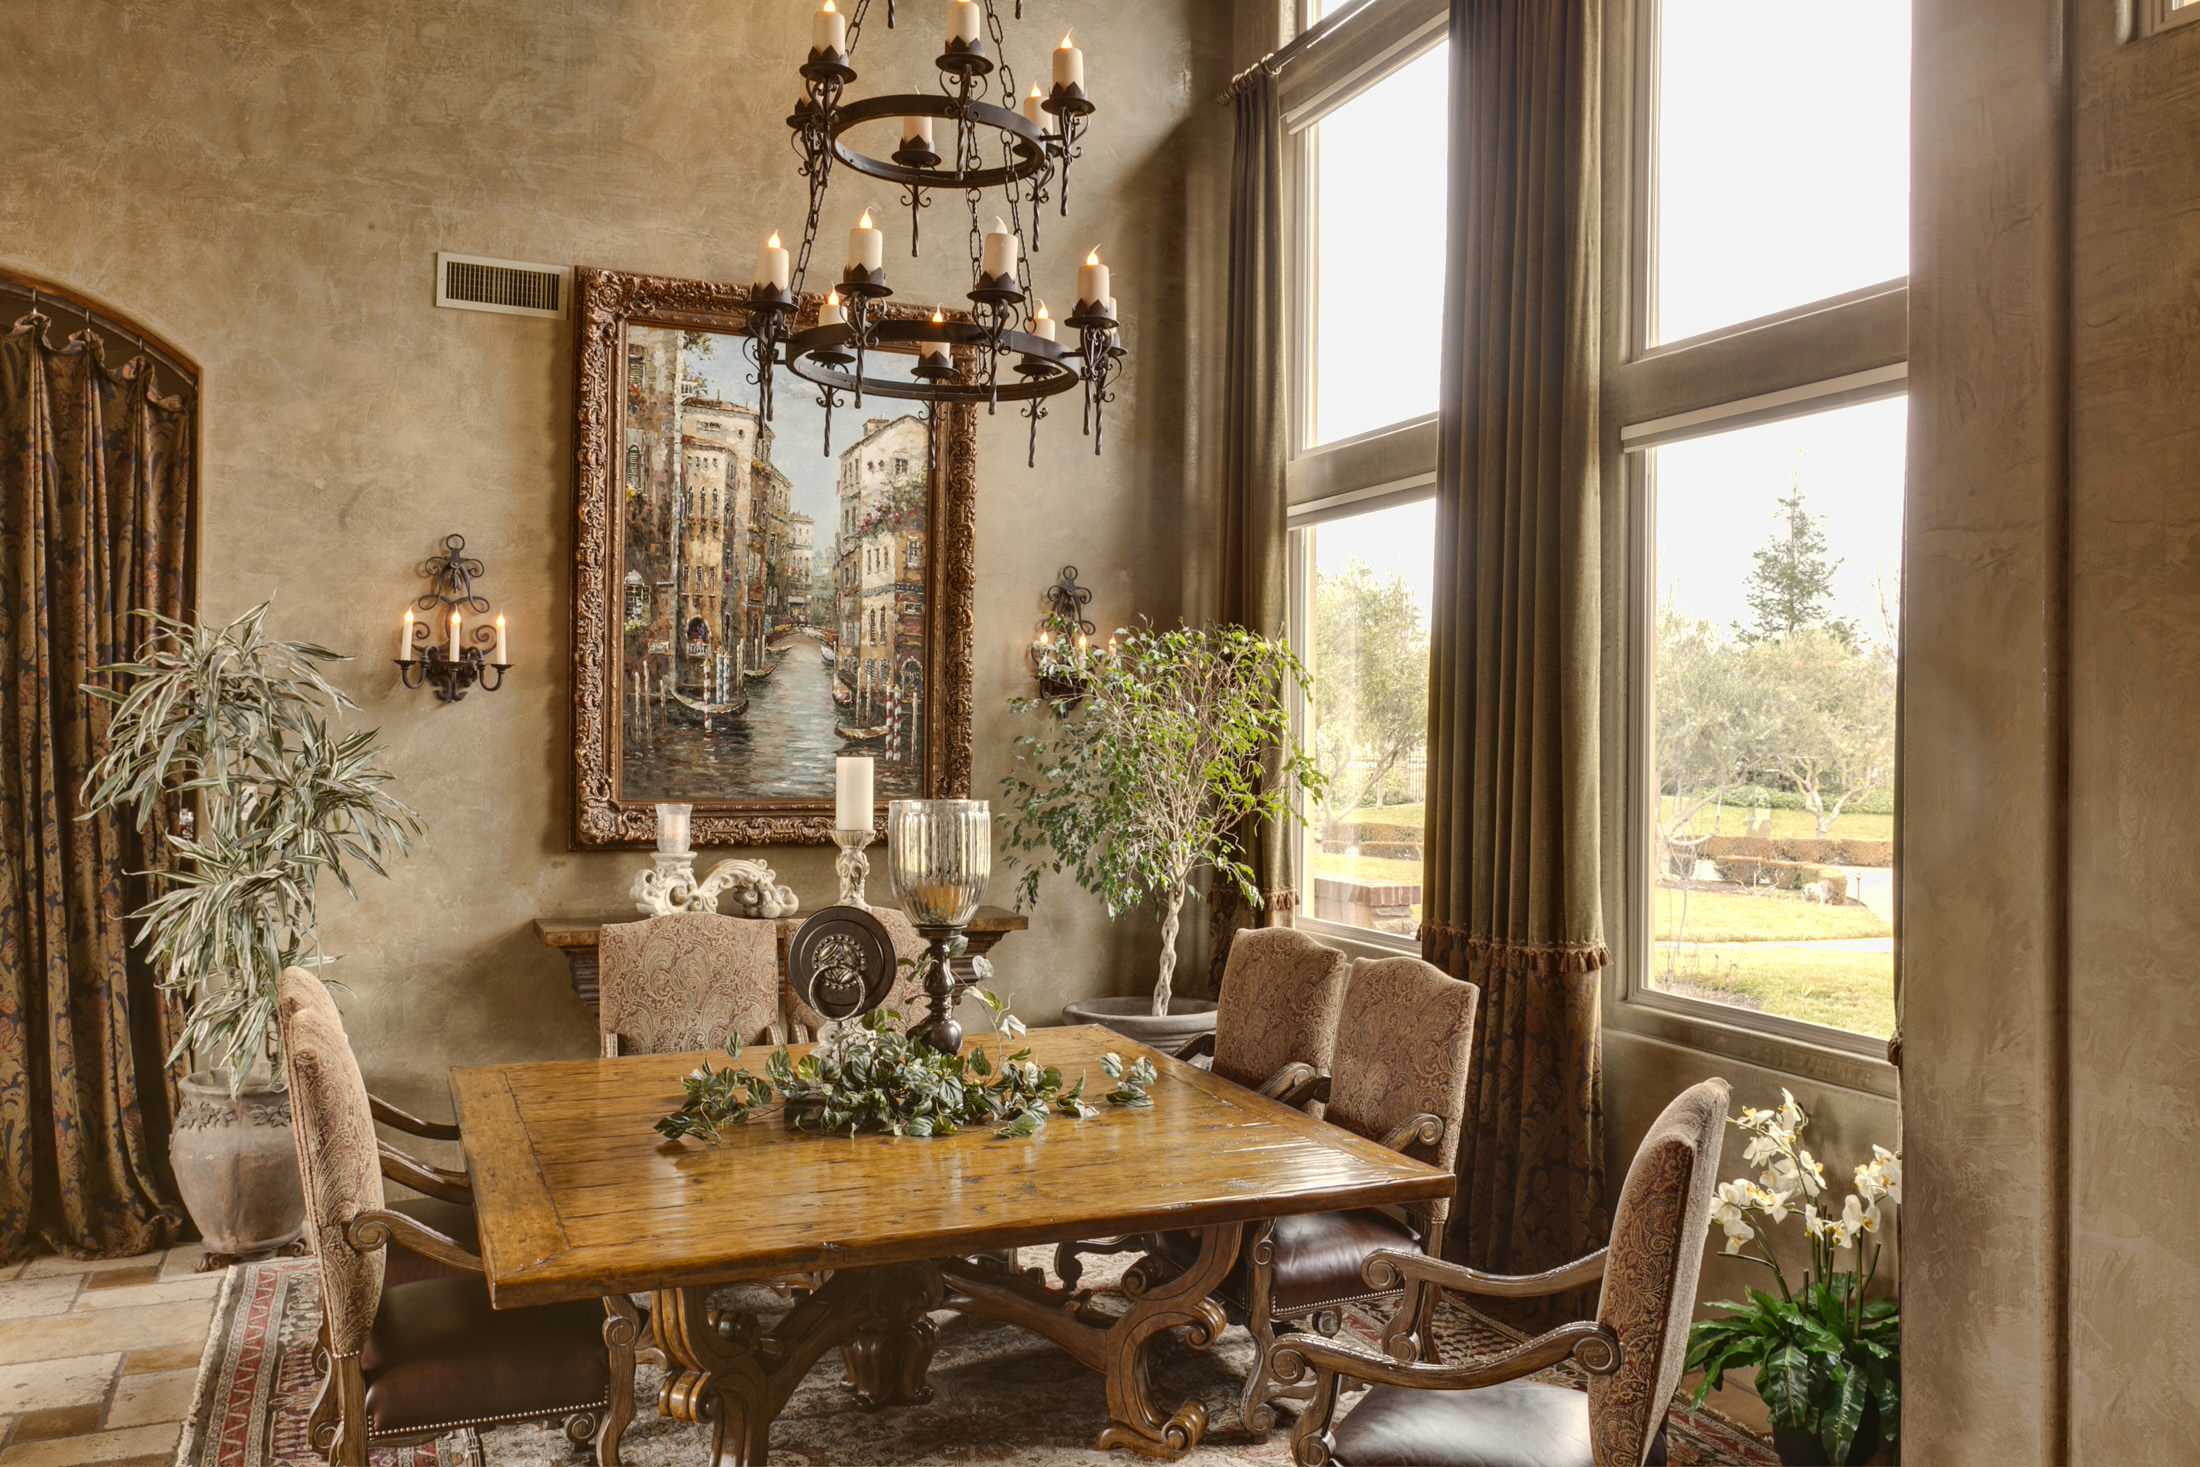 Tuscan Traditions: Warmth and Hospitality in Home Decor